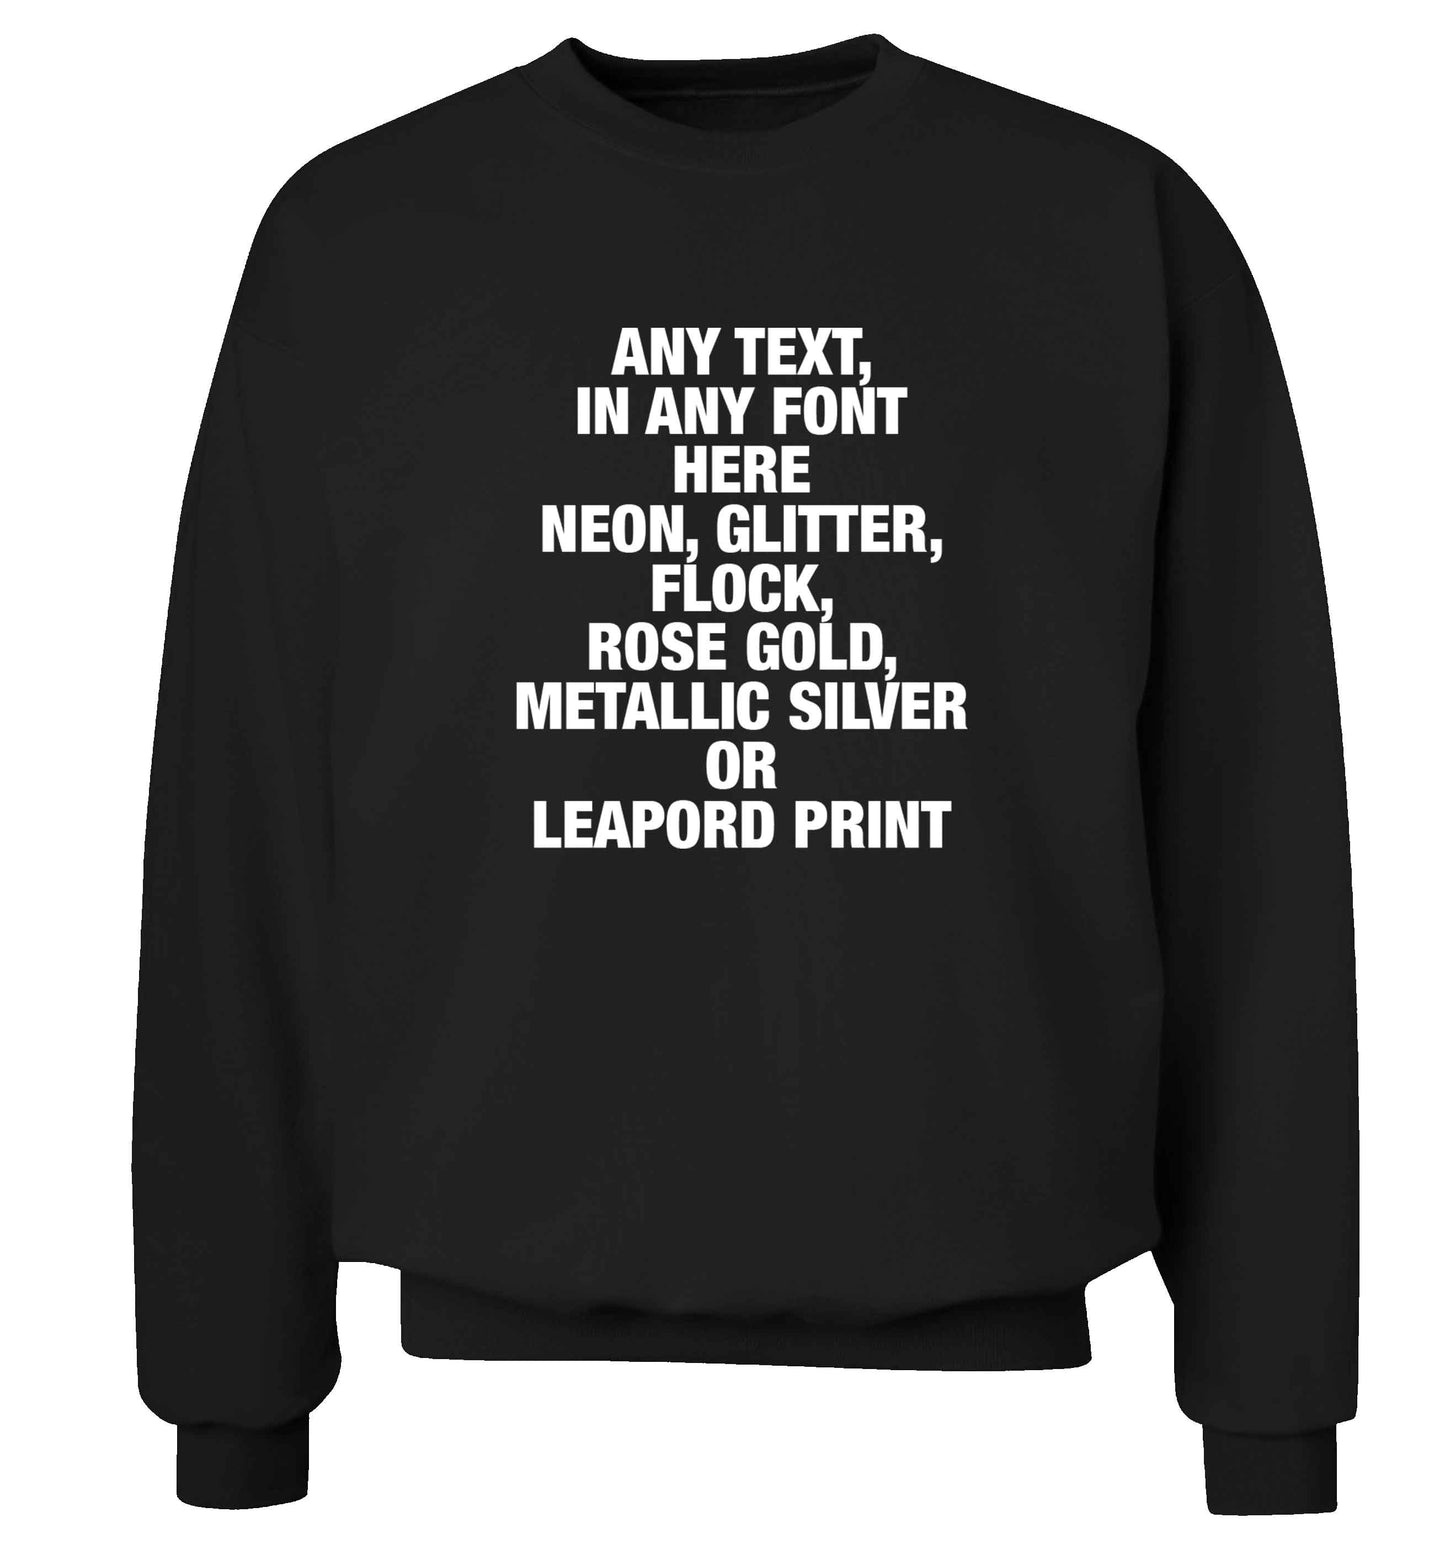 Premium custom order any text colour and font adult's unisex black sweater 2XL